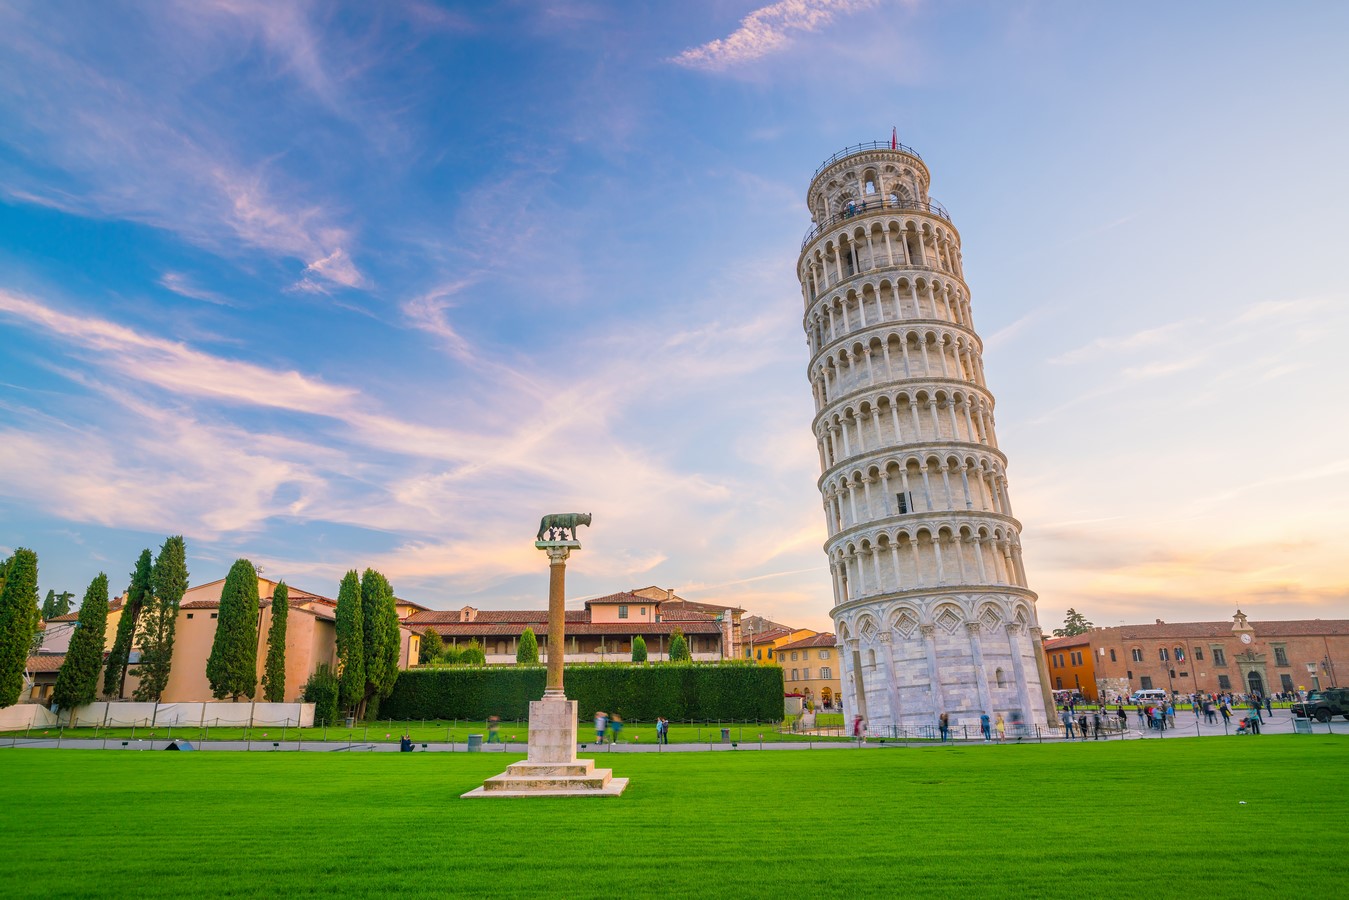 Timeline of restoration: The Leaning Tower of Pisa - Sheet1